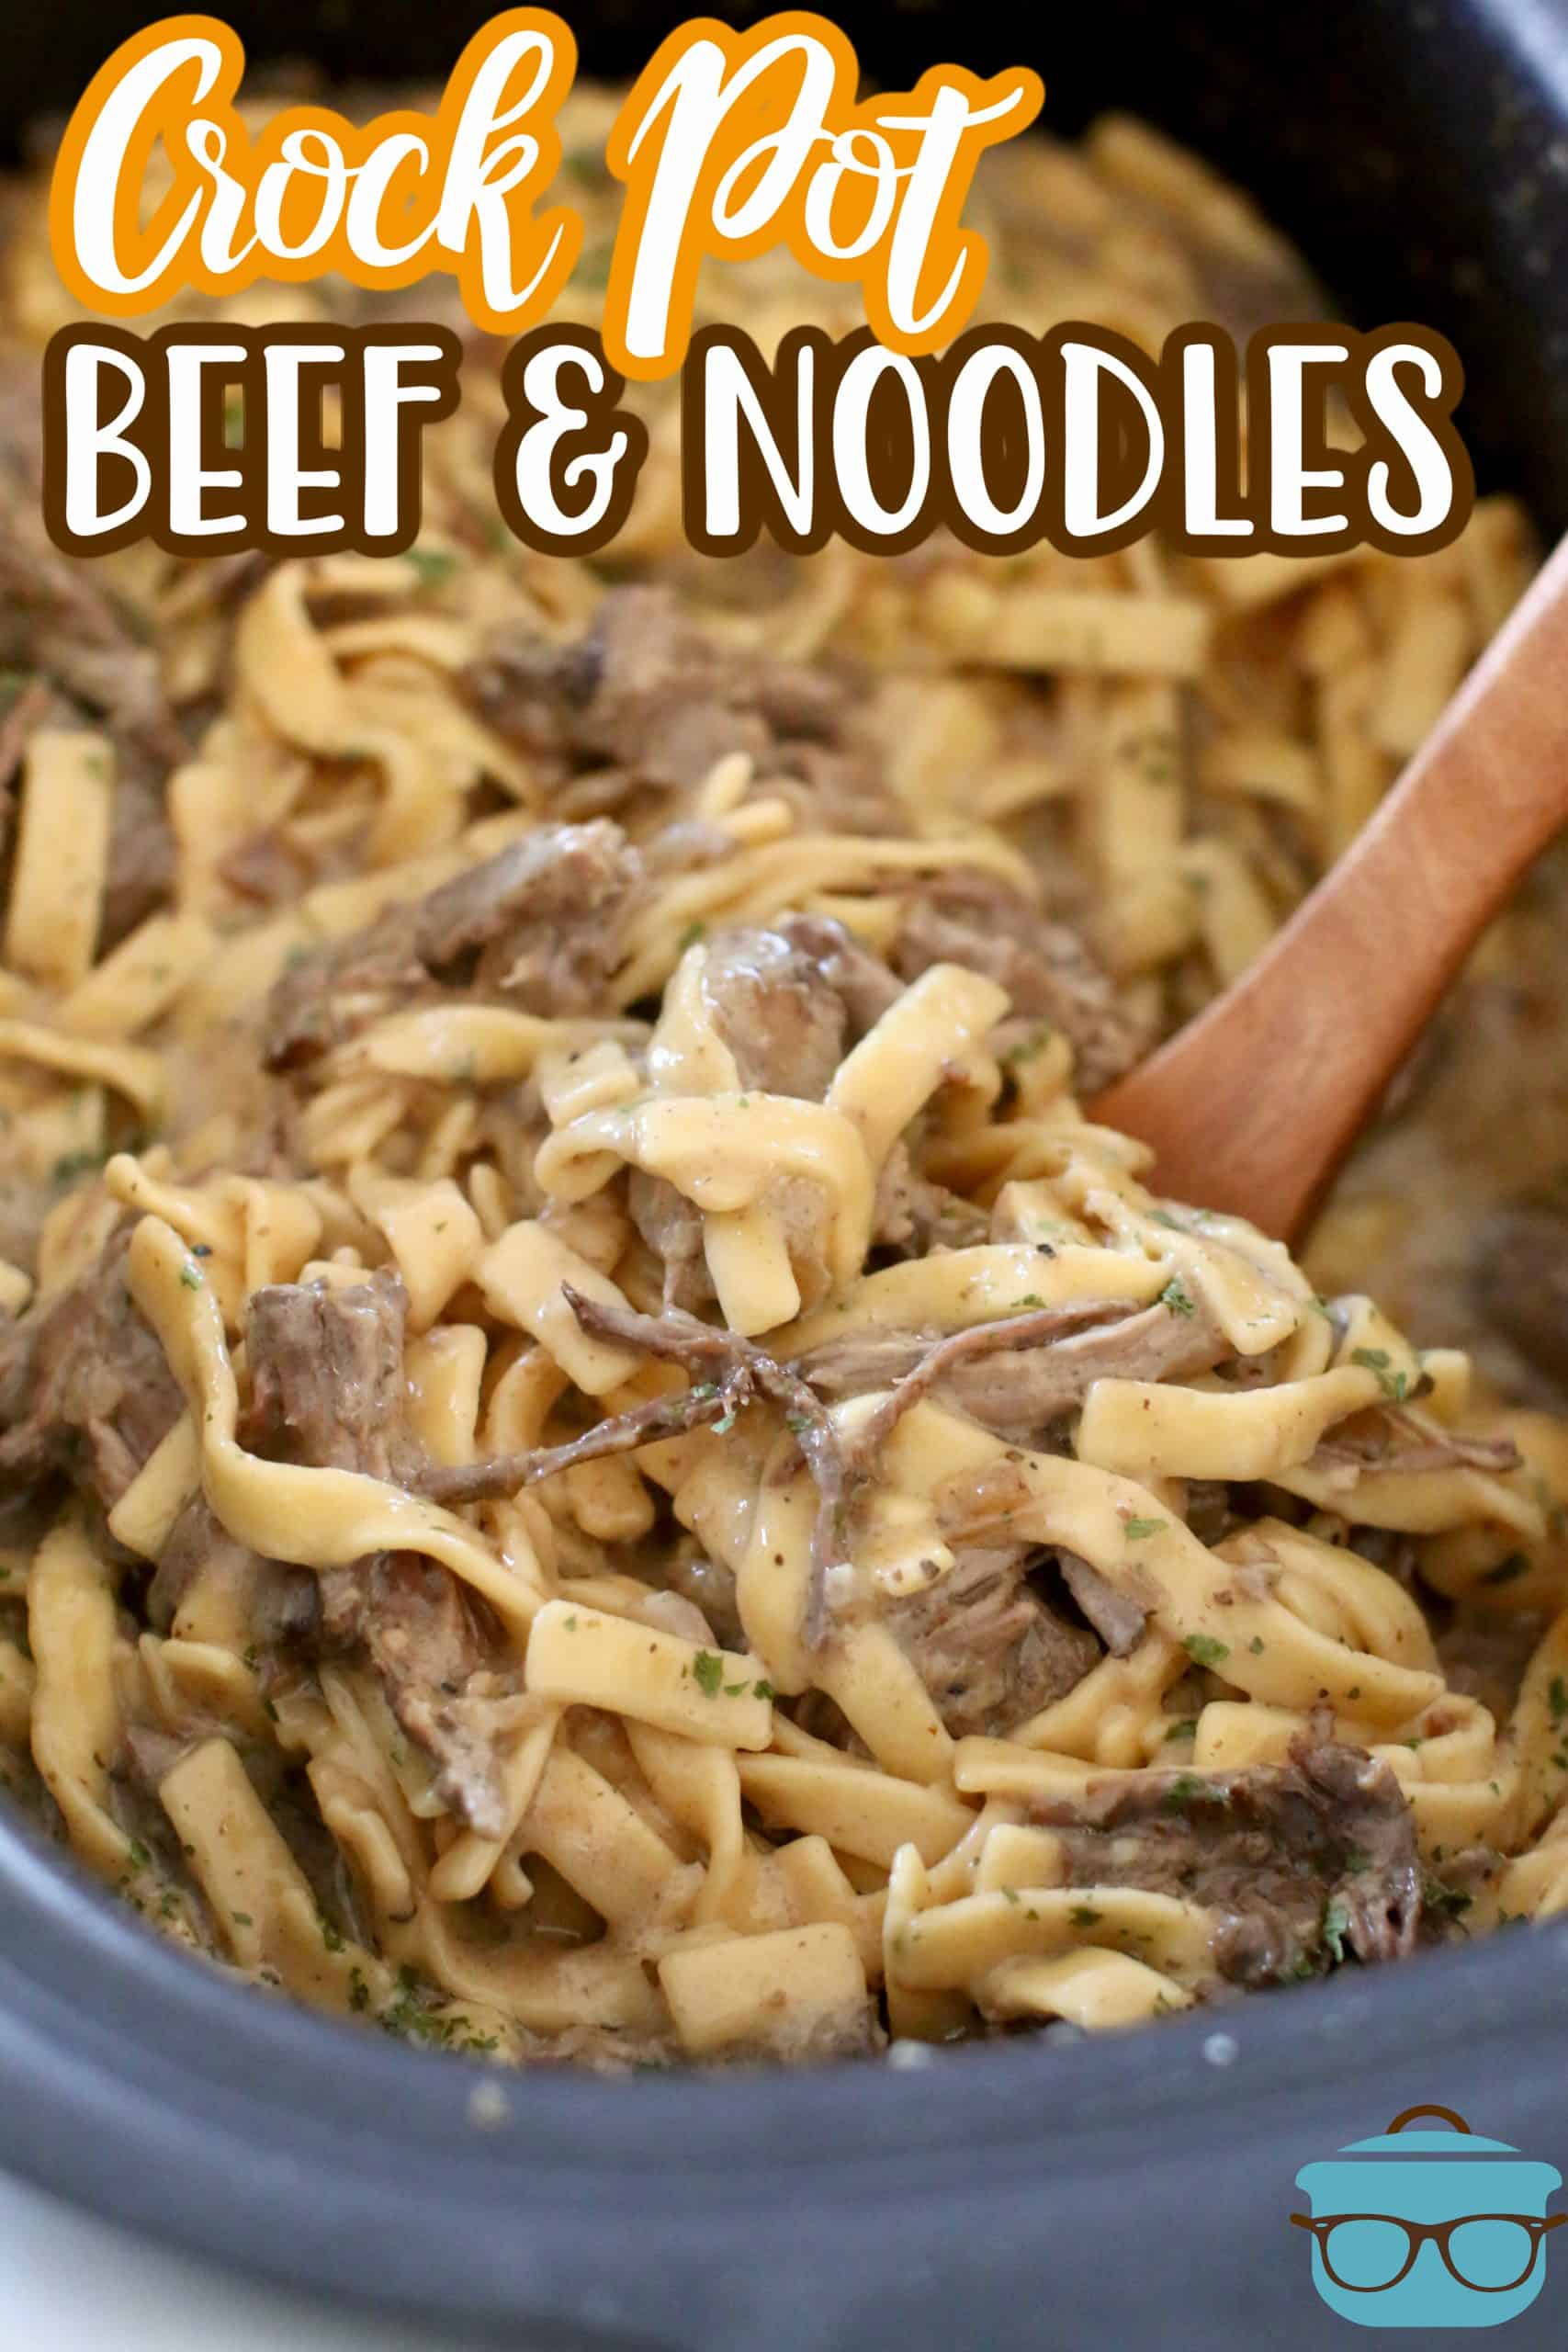 Crock Pot Beef and Noodles recipe from The Country Cook, beef and noodles shown in a slow cooker with a wooden spoon.